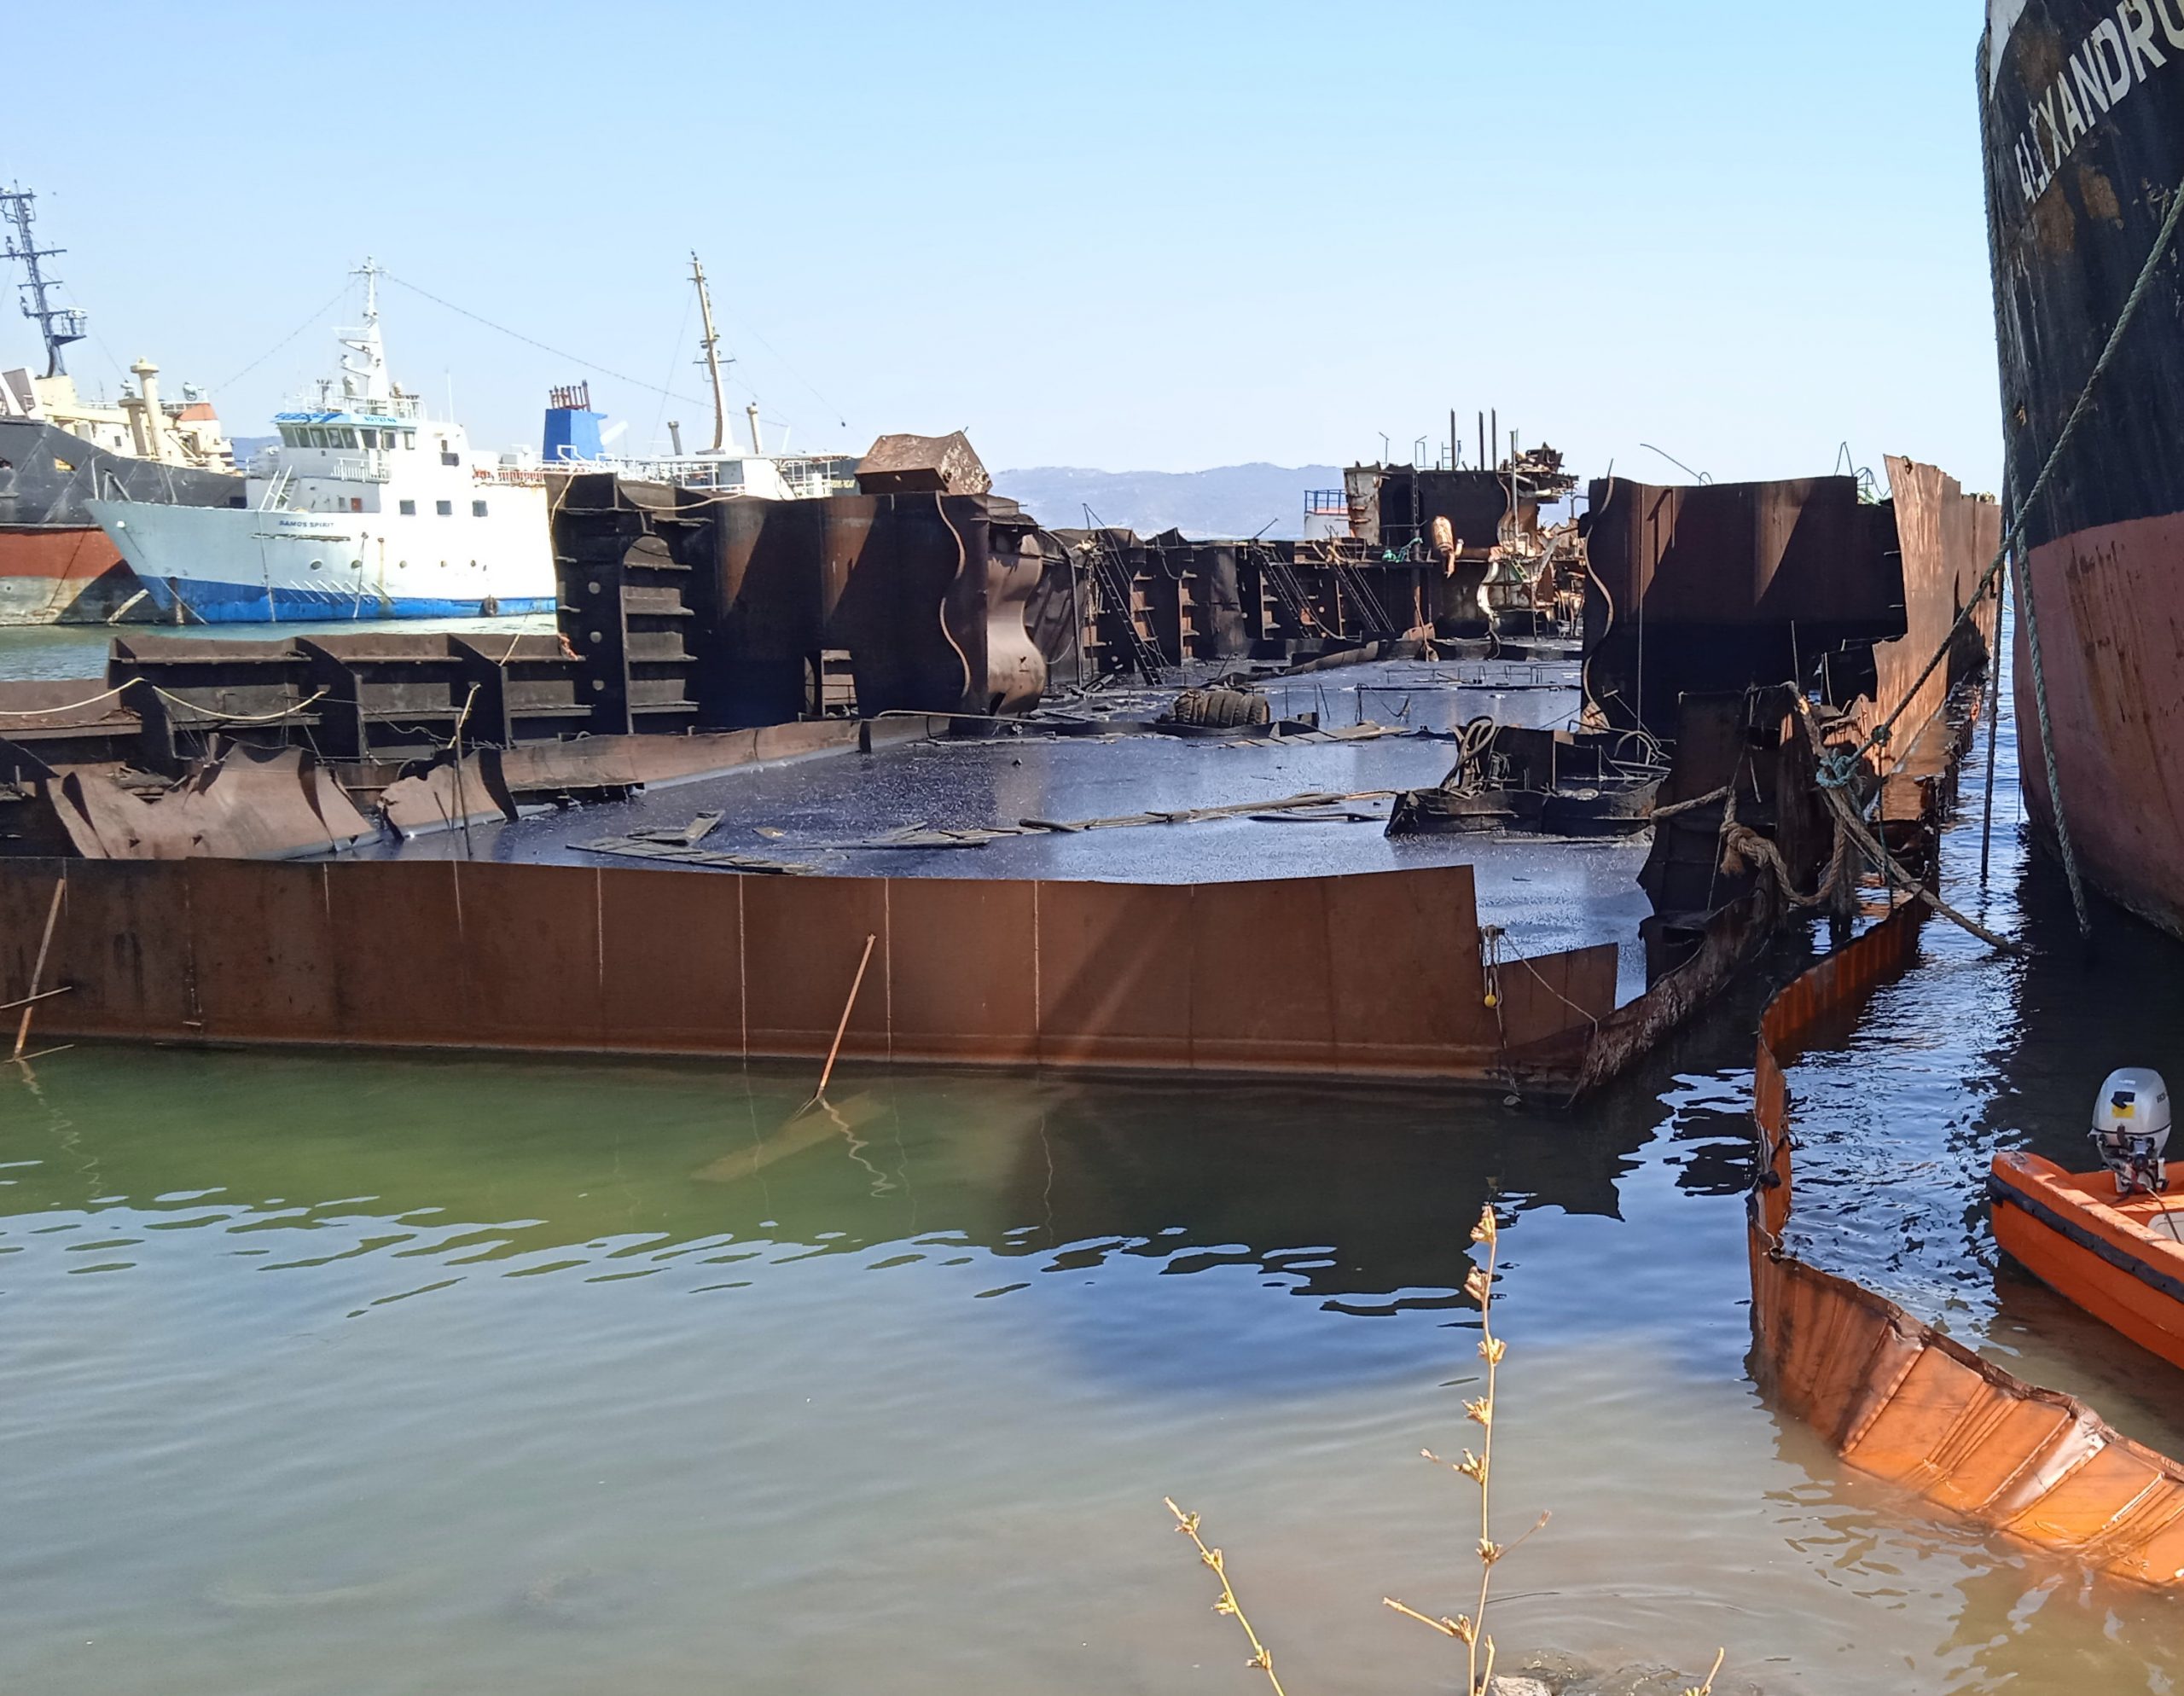 Elefsina: The procedures for the removal of the “SLOPS” wreck are being accelerated